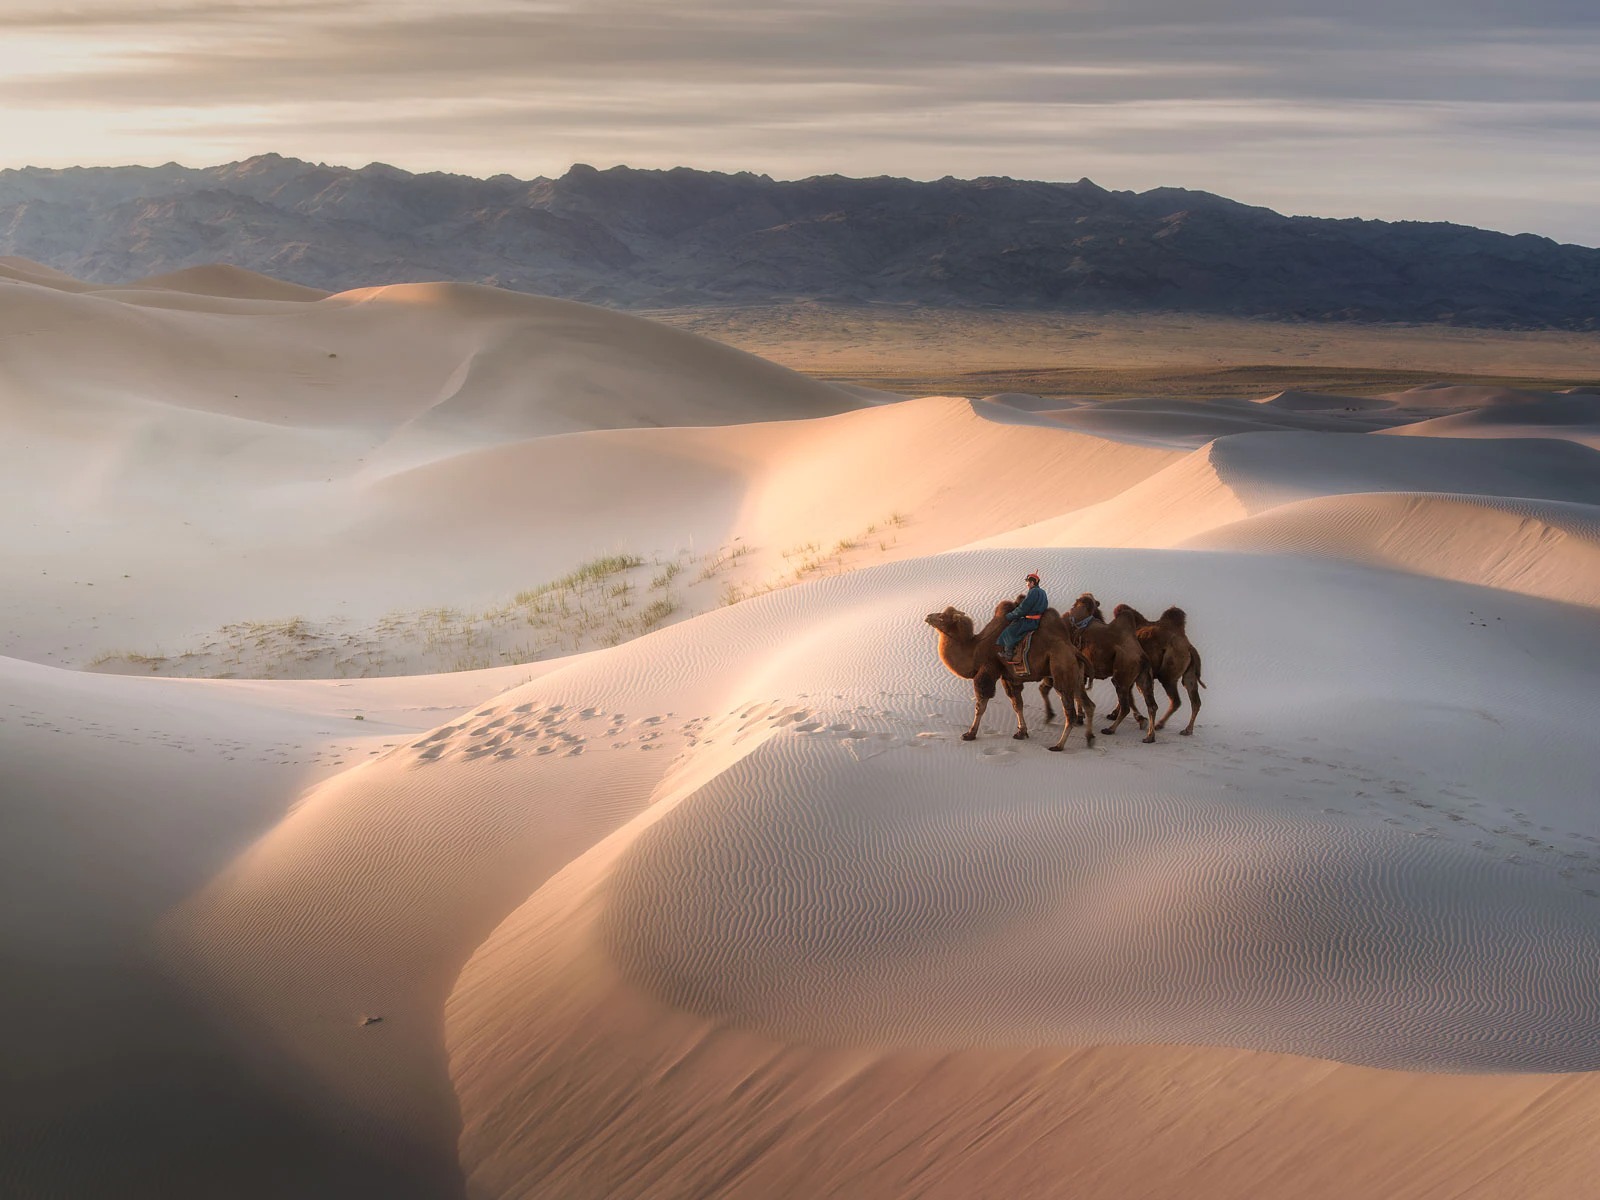 Are You a World Traveler? Test Your Knowledge by Matching These Majestic Natural Sites to Their Countries! Gobi Desert, Mongolia Camels